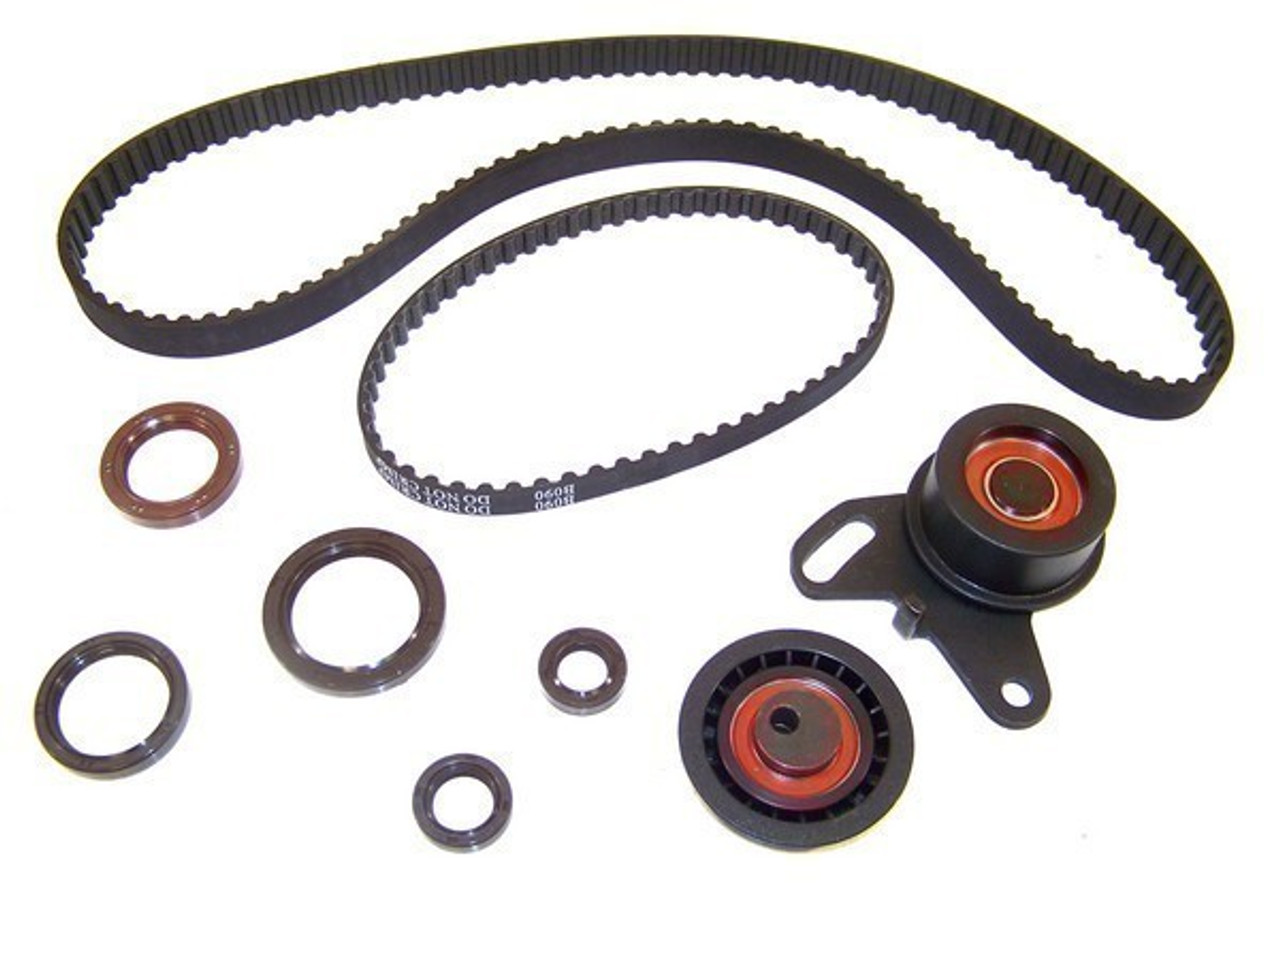 1986 Plymouth Colt 2.0L Engine Timing Belt Component Kit TBK105 -49